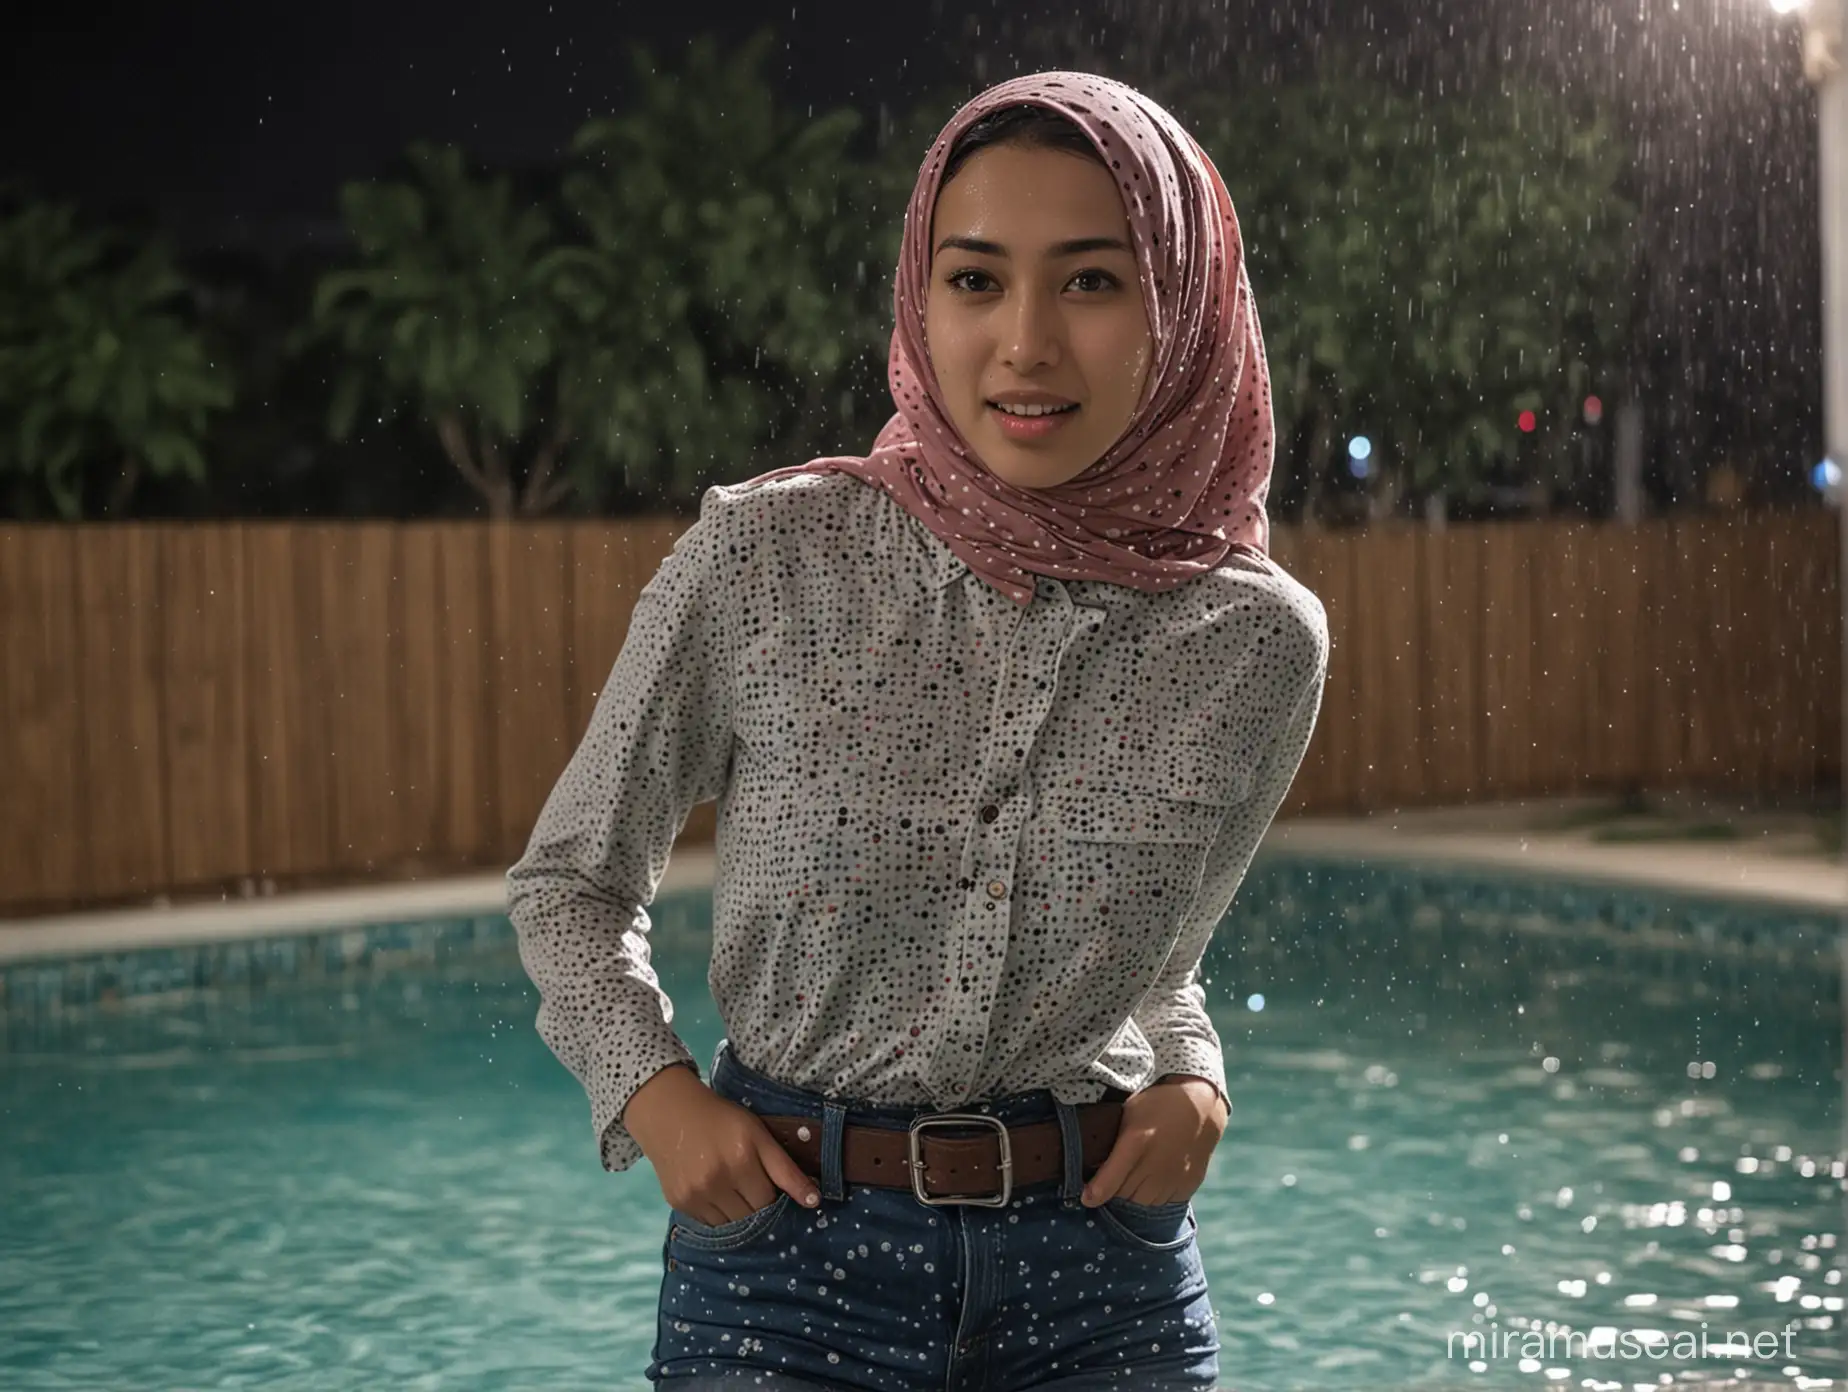 15 years old woman - malaysian, flat-chested, tight polkadot print cotton blouse tucked into jeans with belt - soaking diaphanous wet, hijab, out from the swimming pool, wet face, wet clothes, wet body, goofy expression, at night